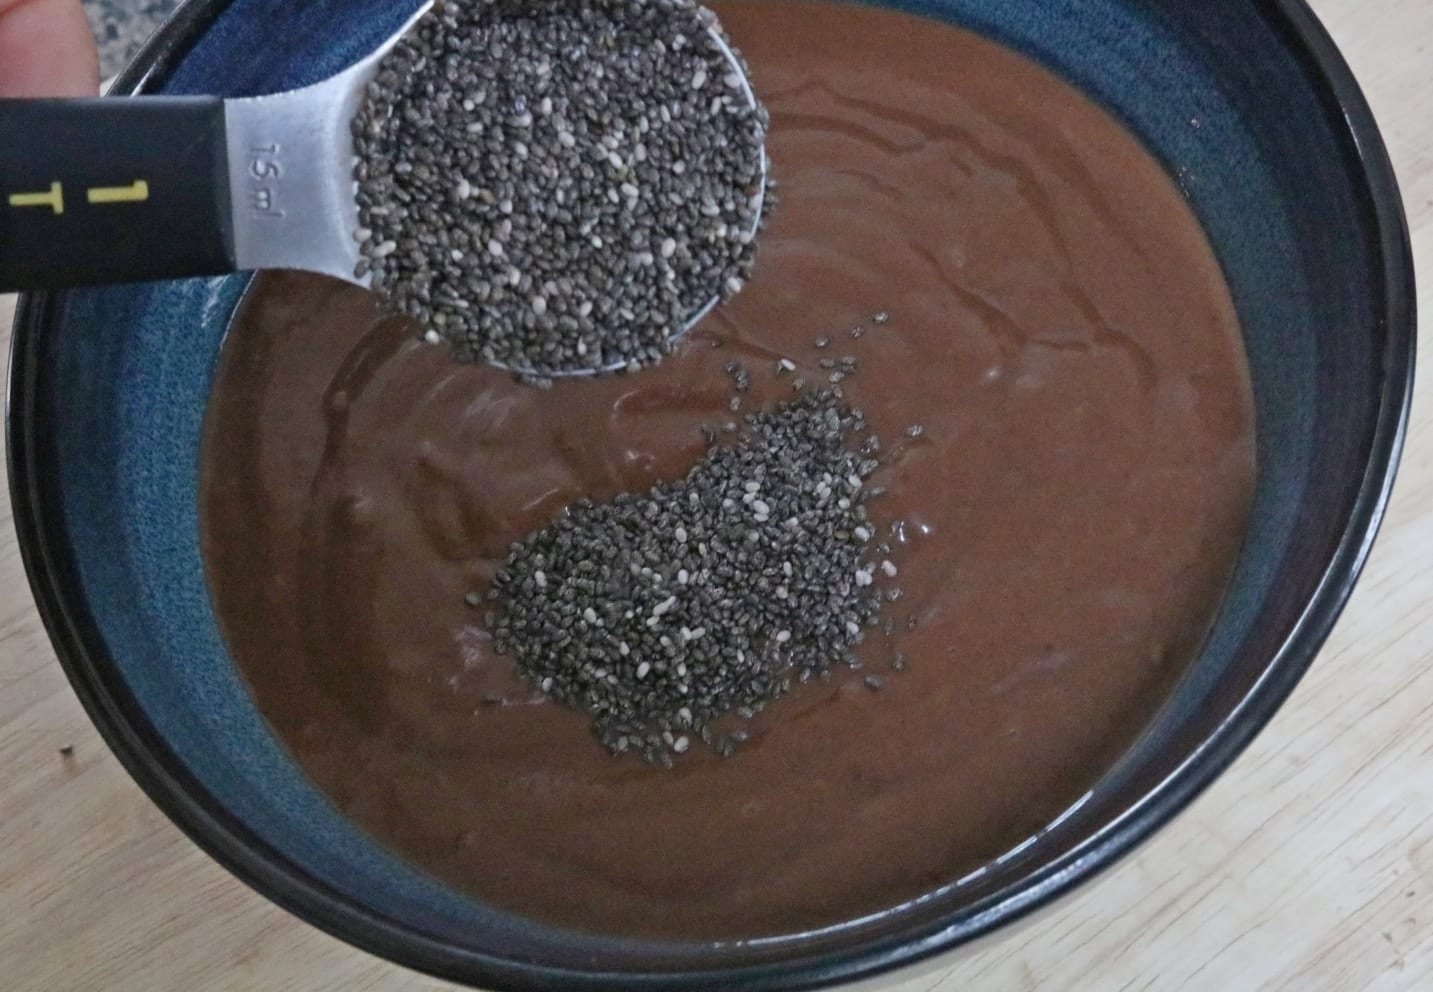 A spoonful of chia seeds being poured over a bowl of chocolate pudding